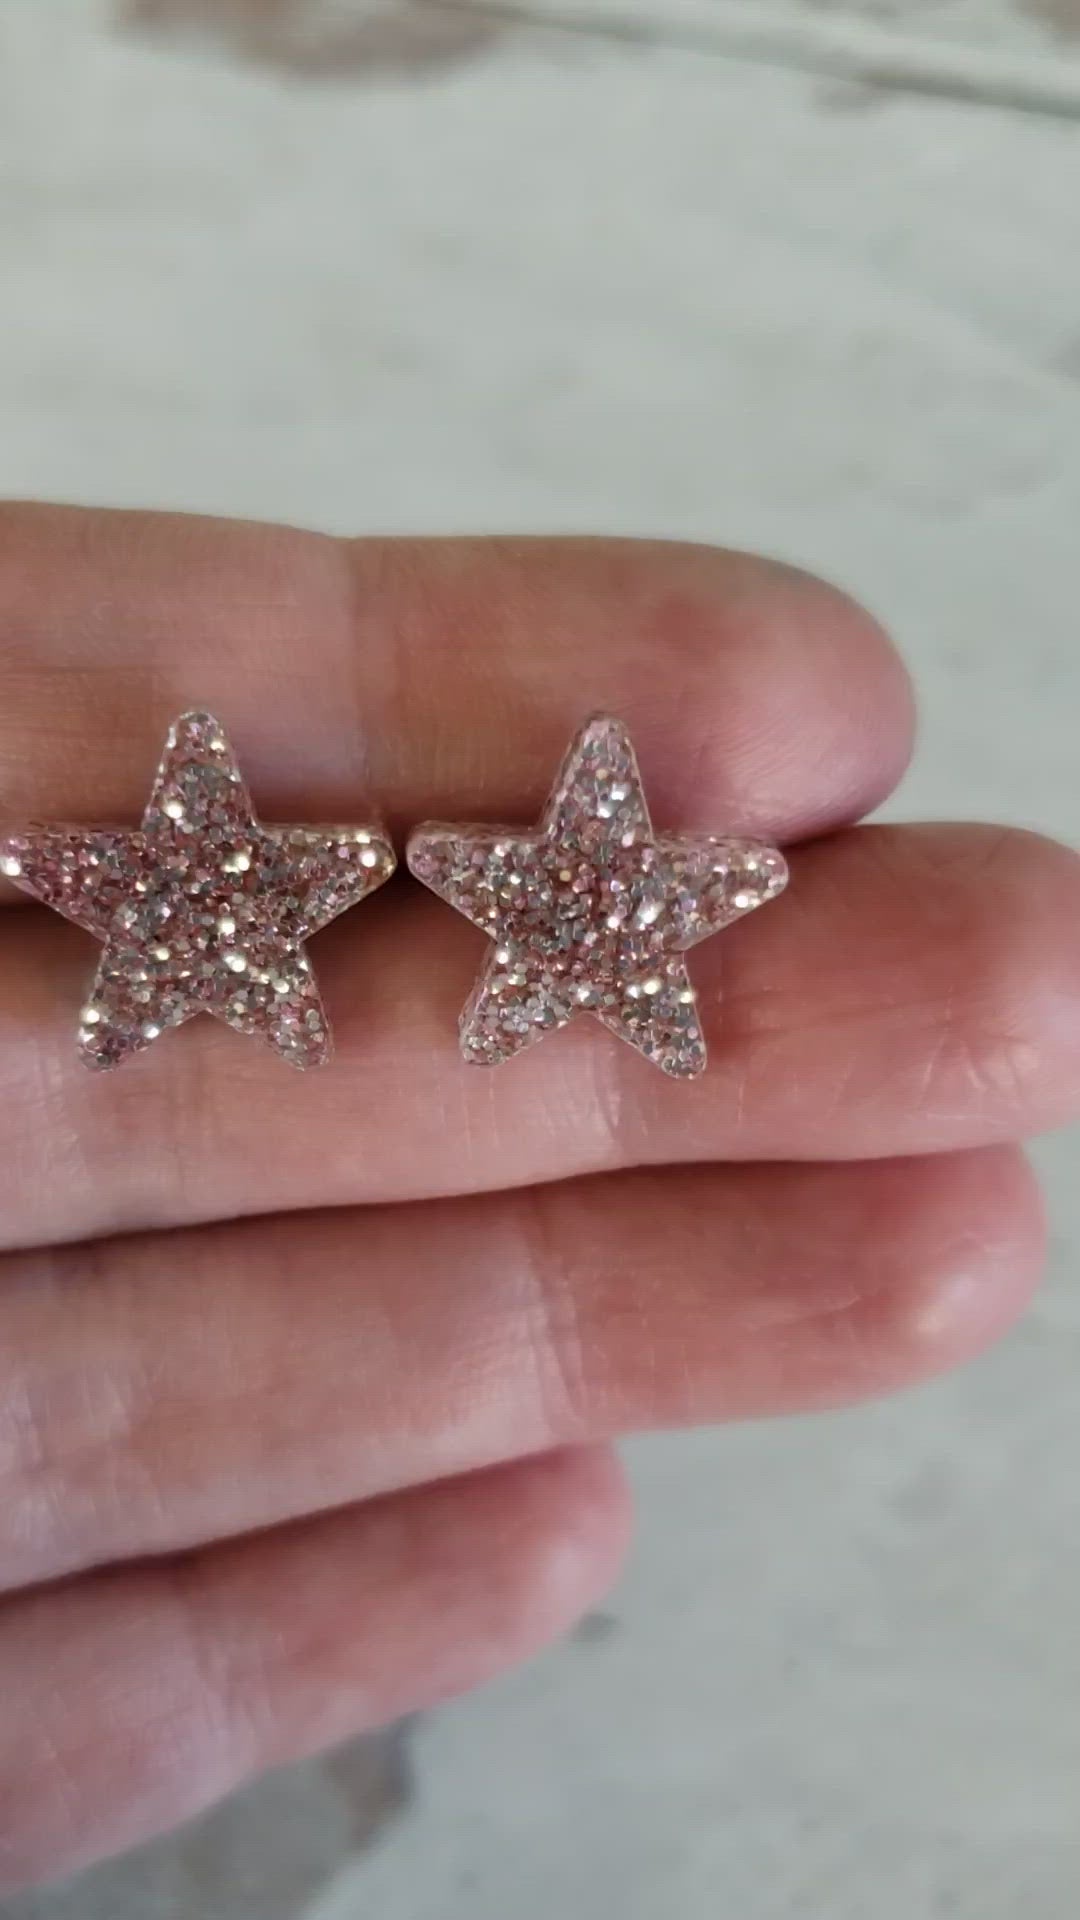 Video of rose gold tone glitter star shaped earrings to show glitter effect